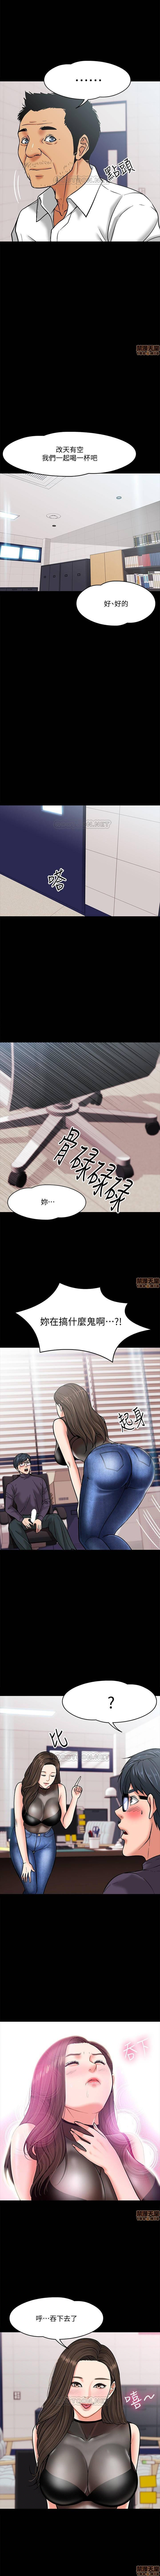 PROFESSOR, ARE YOU JUST GOING TO LOOK AT ME? | DESIRE SWAMP | 教授，你還等什麼? Ch. 4 [Chinese] Manhwa 8